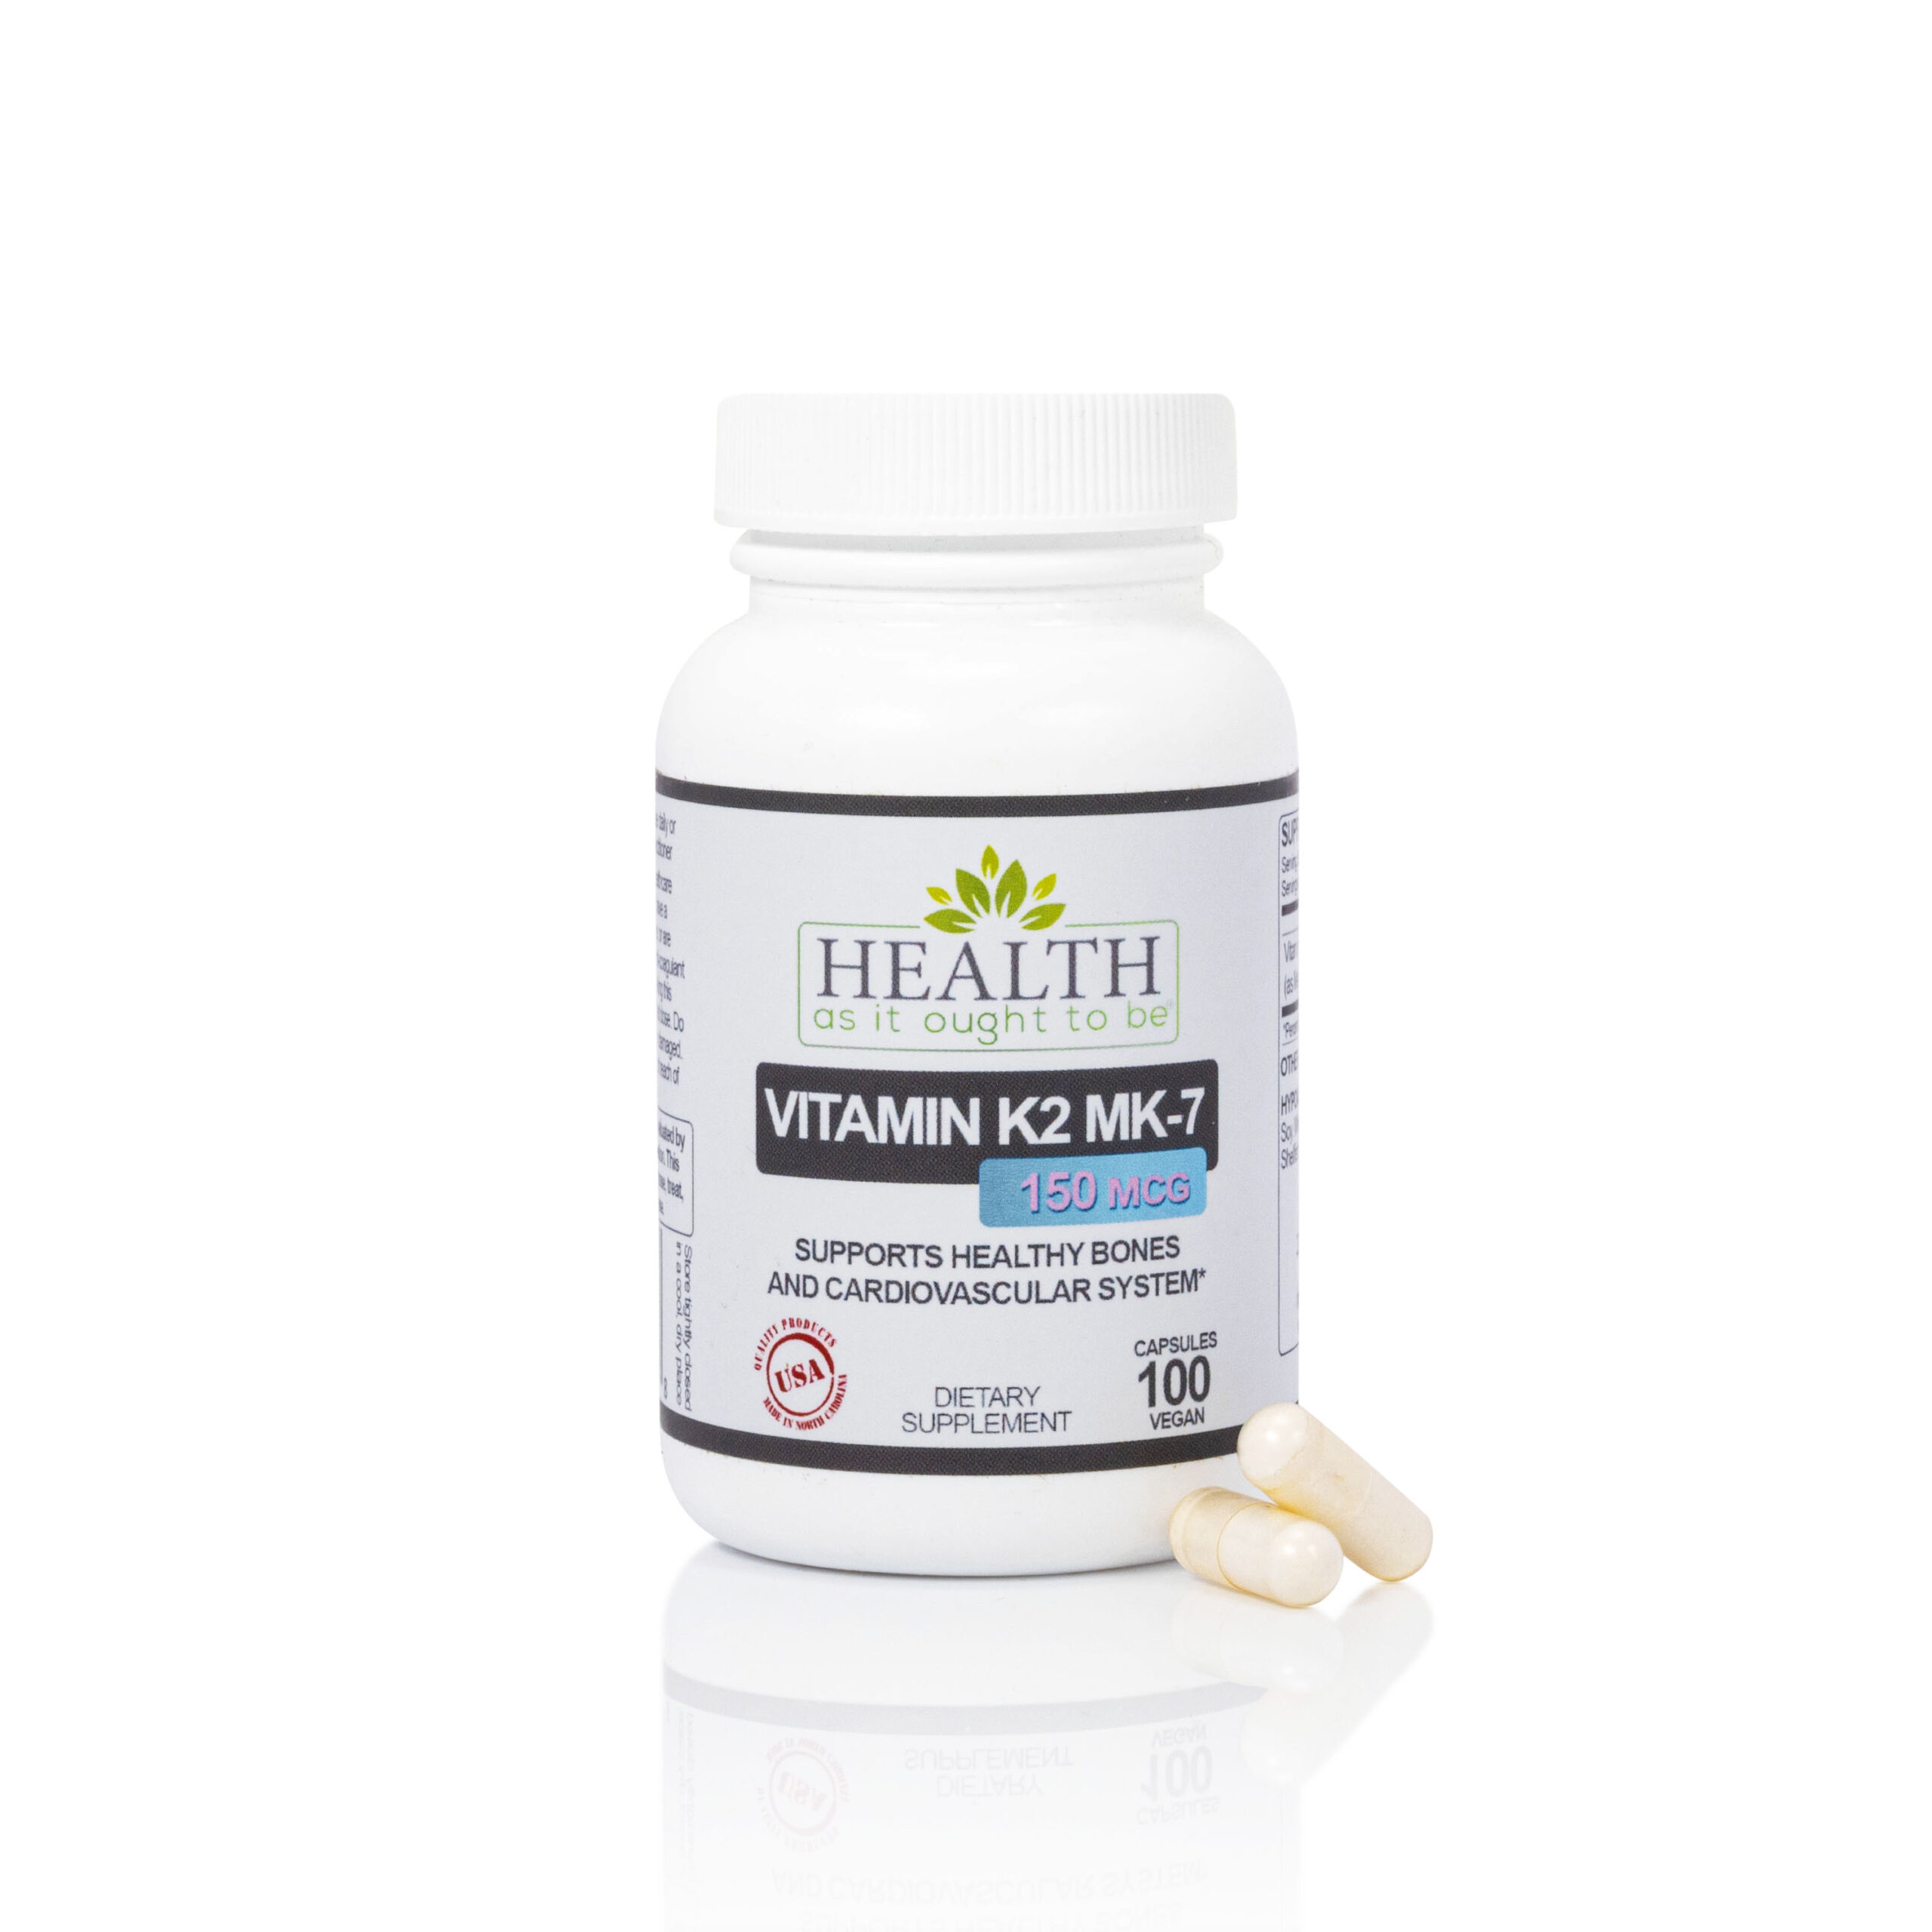 Did You Know Vitamin K-2 Helps Improve Blood Sugar Levels?